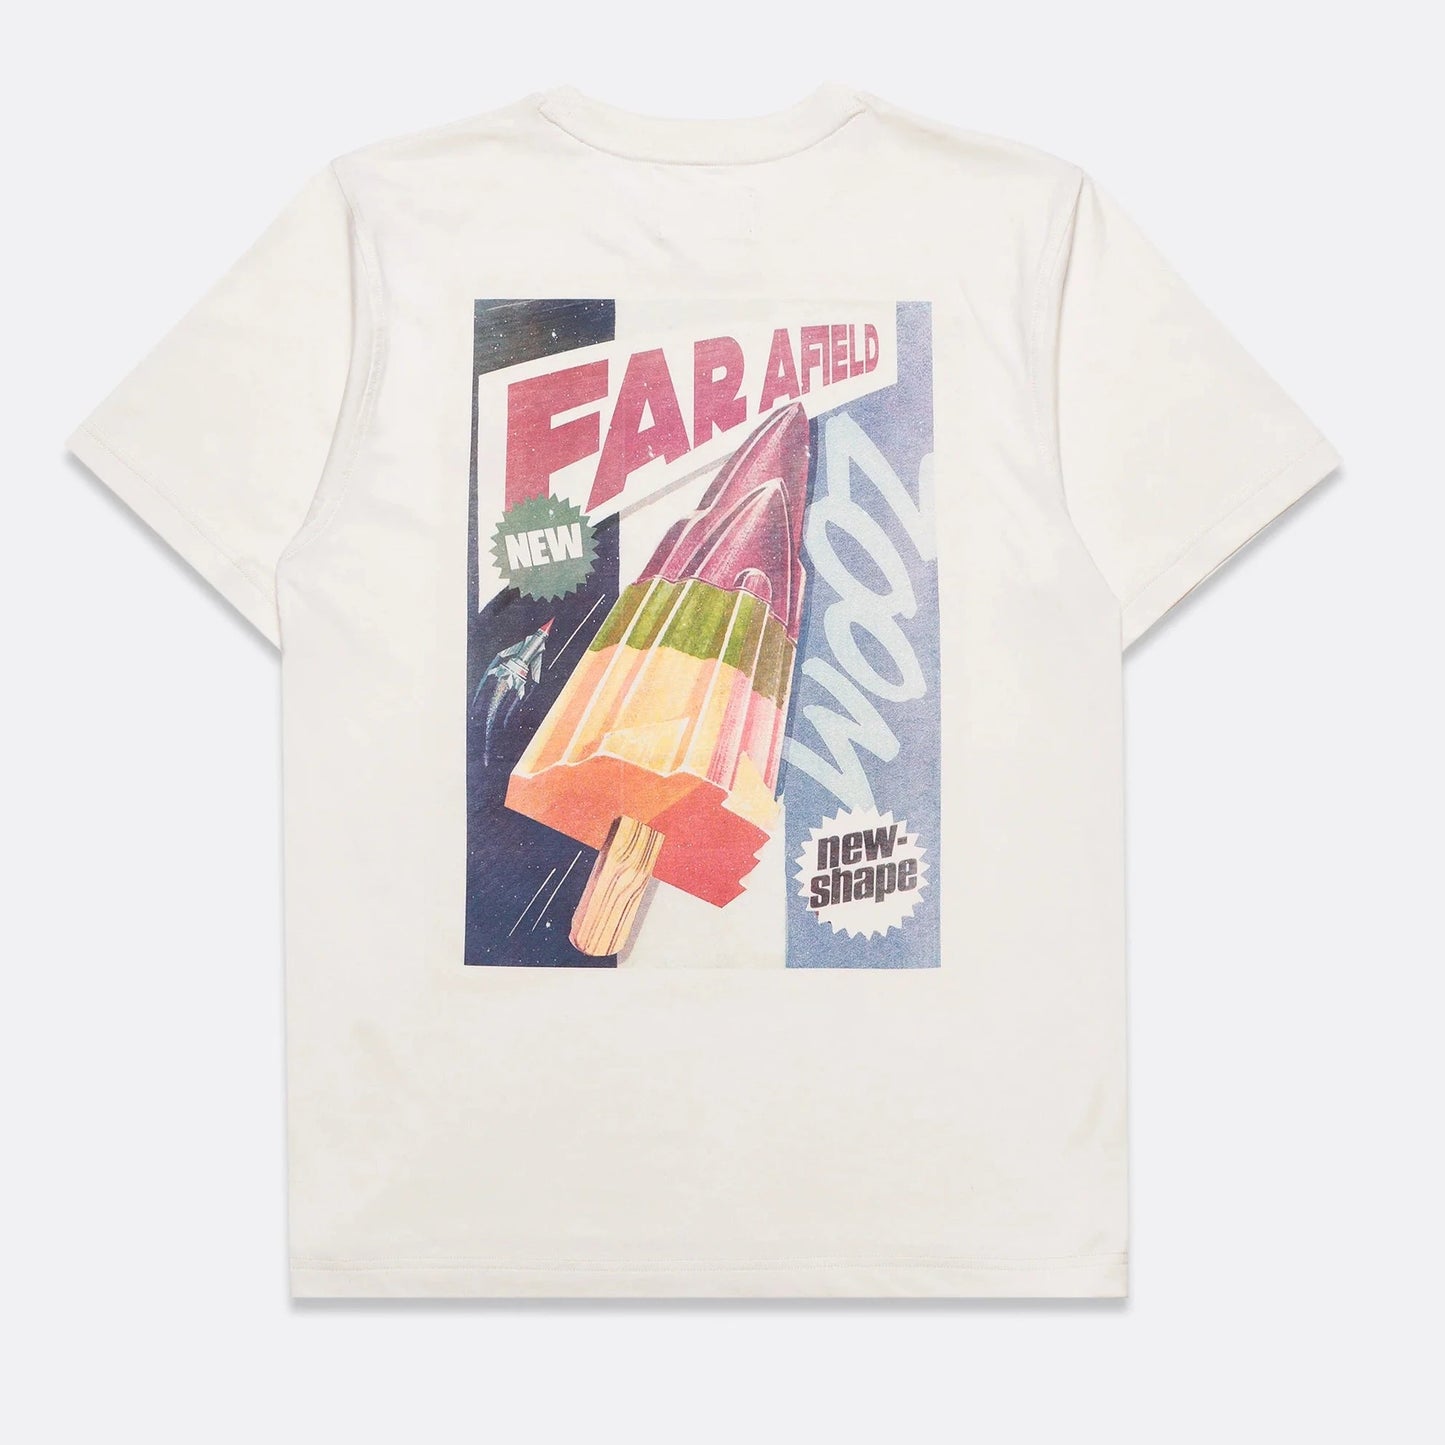 Rocket lolly advert design on the back of a plain white tee